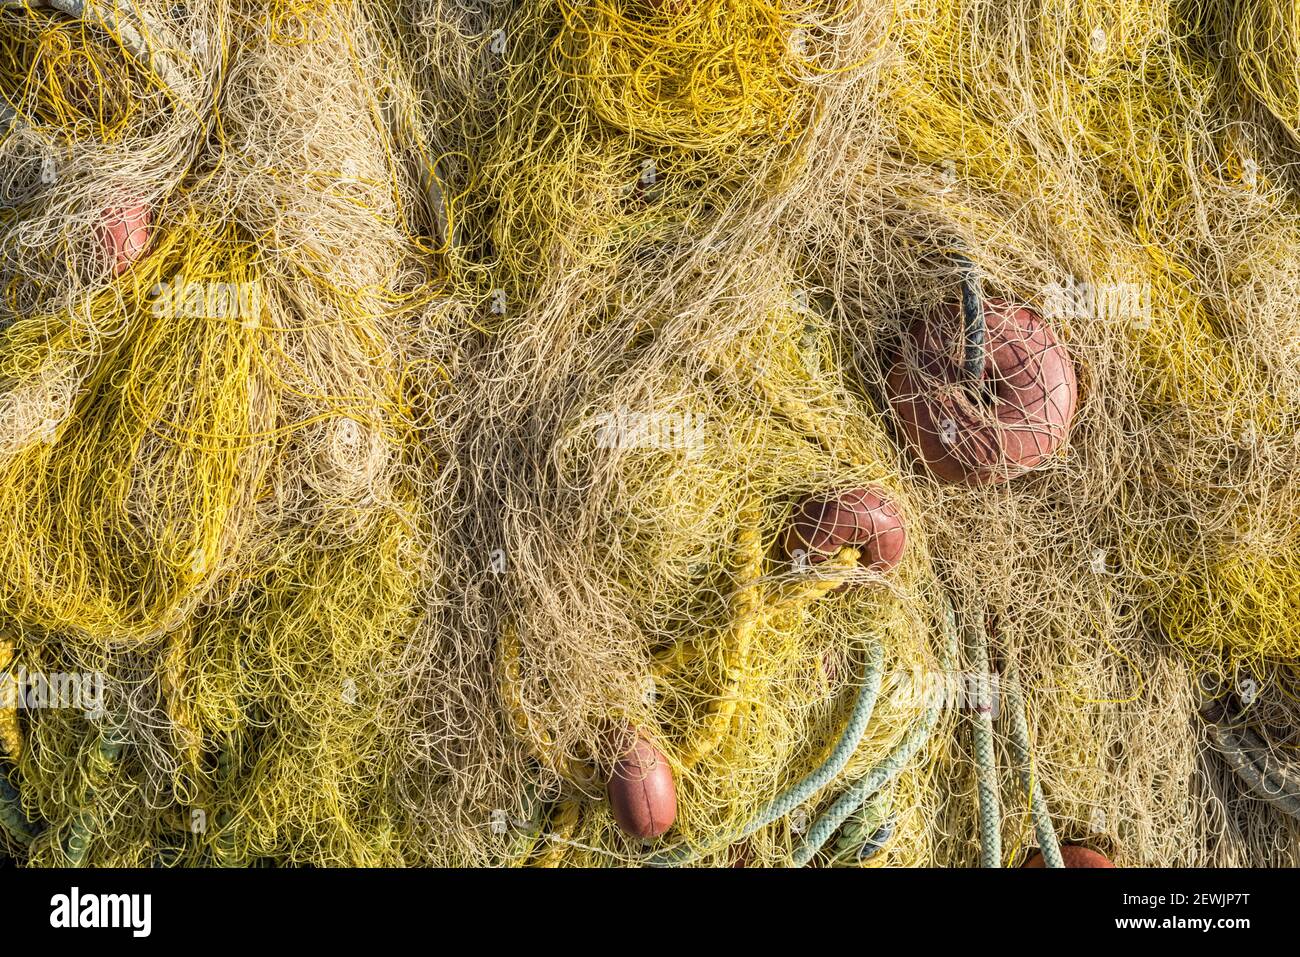 Pile of commercial fishing net with cords and floats Stock Photo